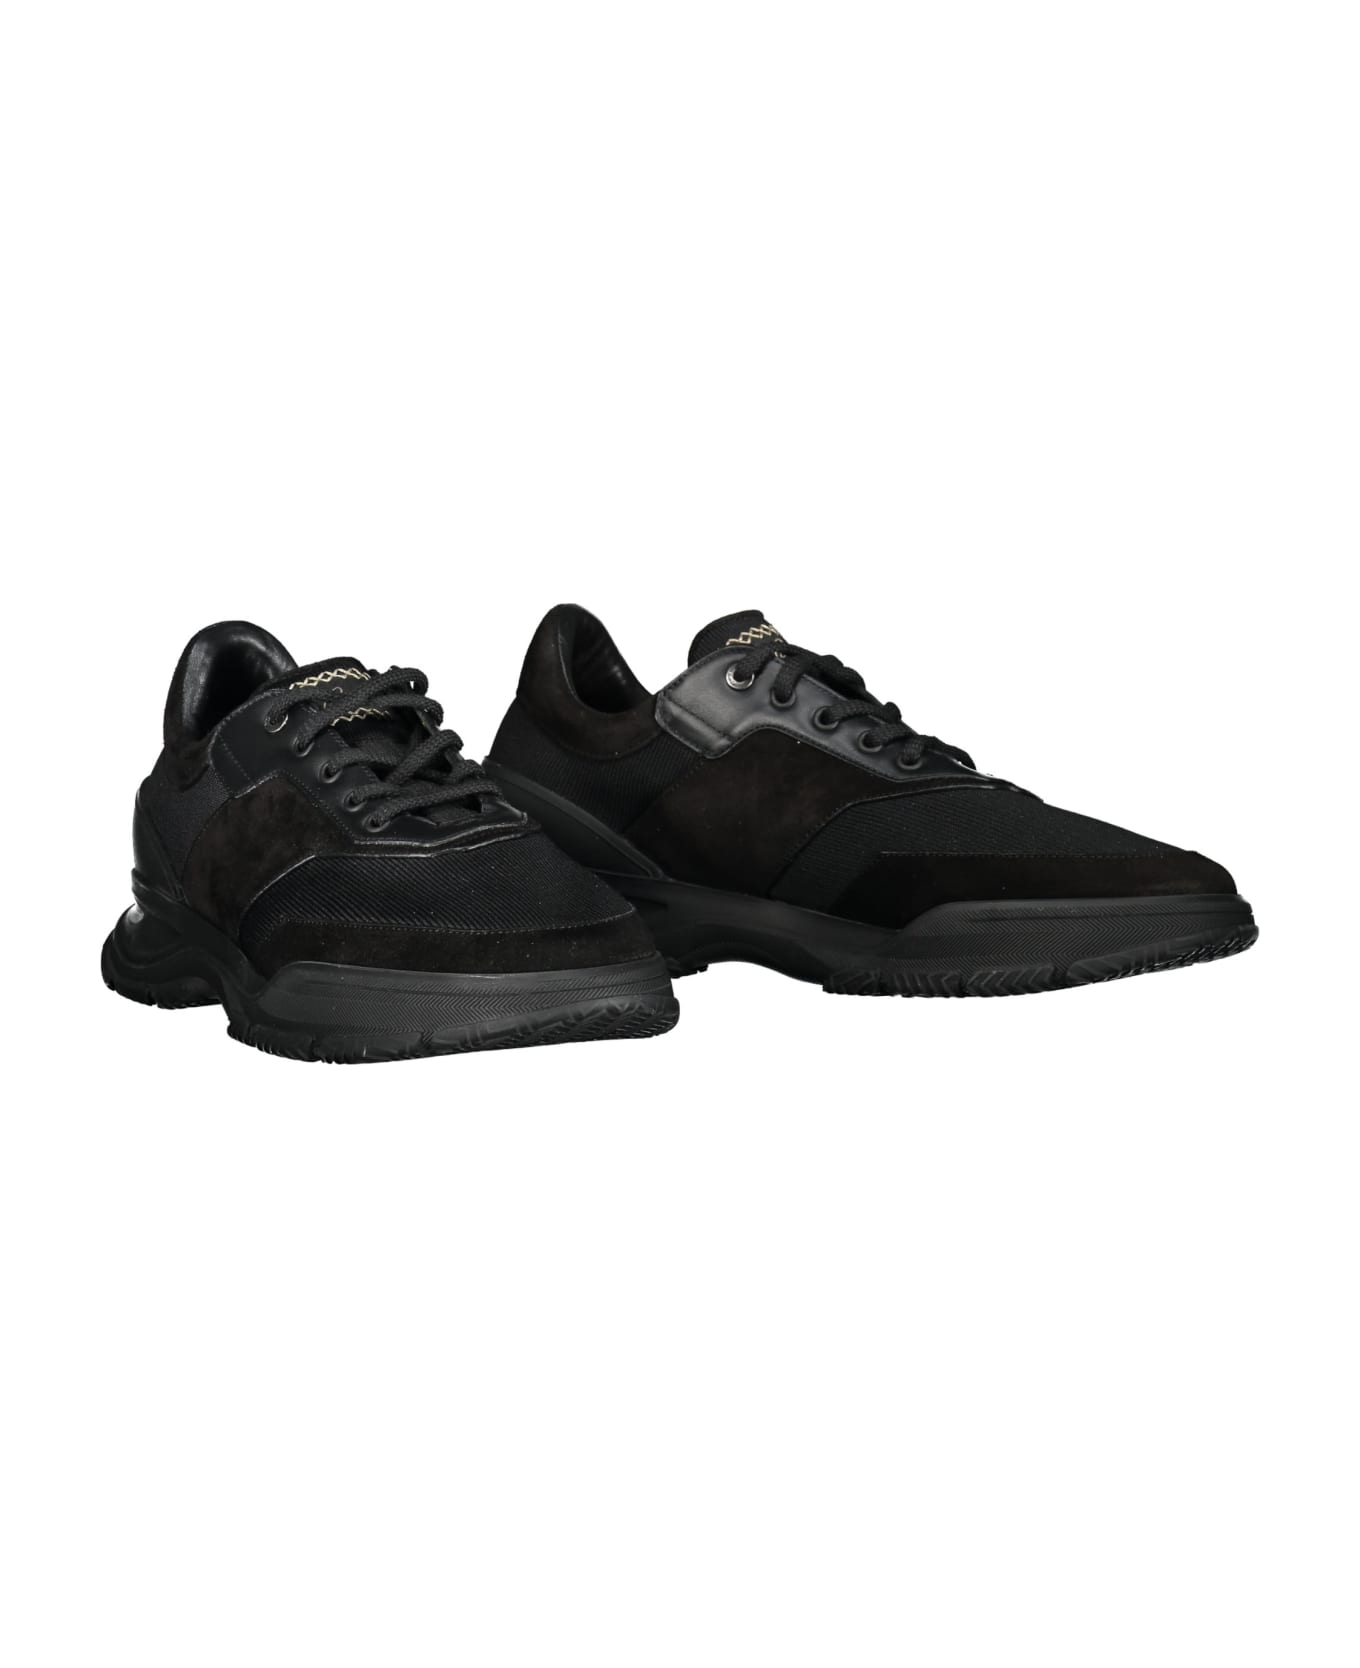 Brioni Leather Sneakers - black スニーカー